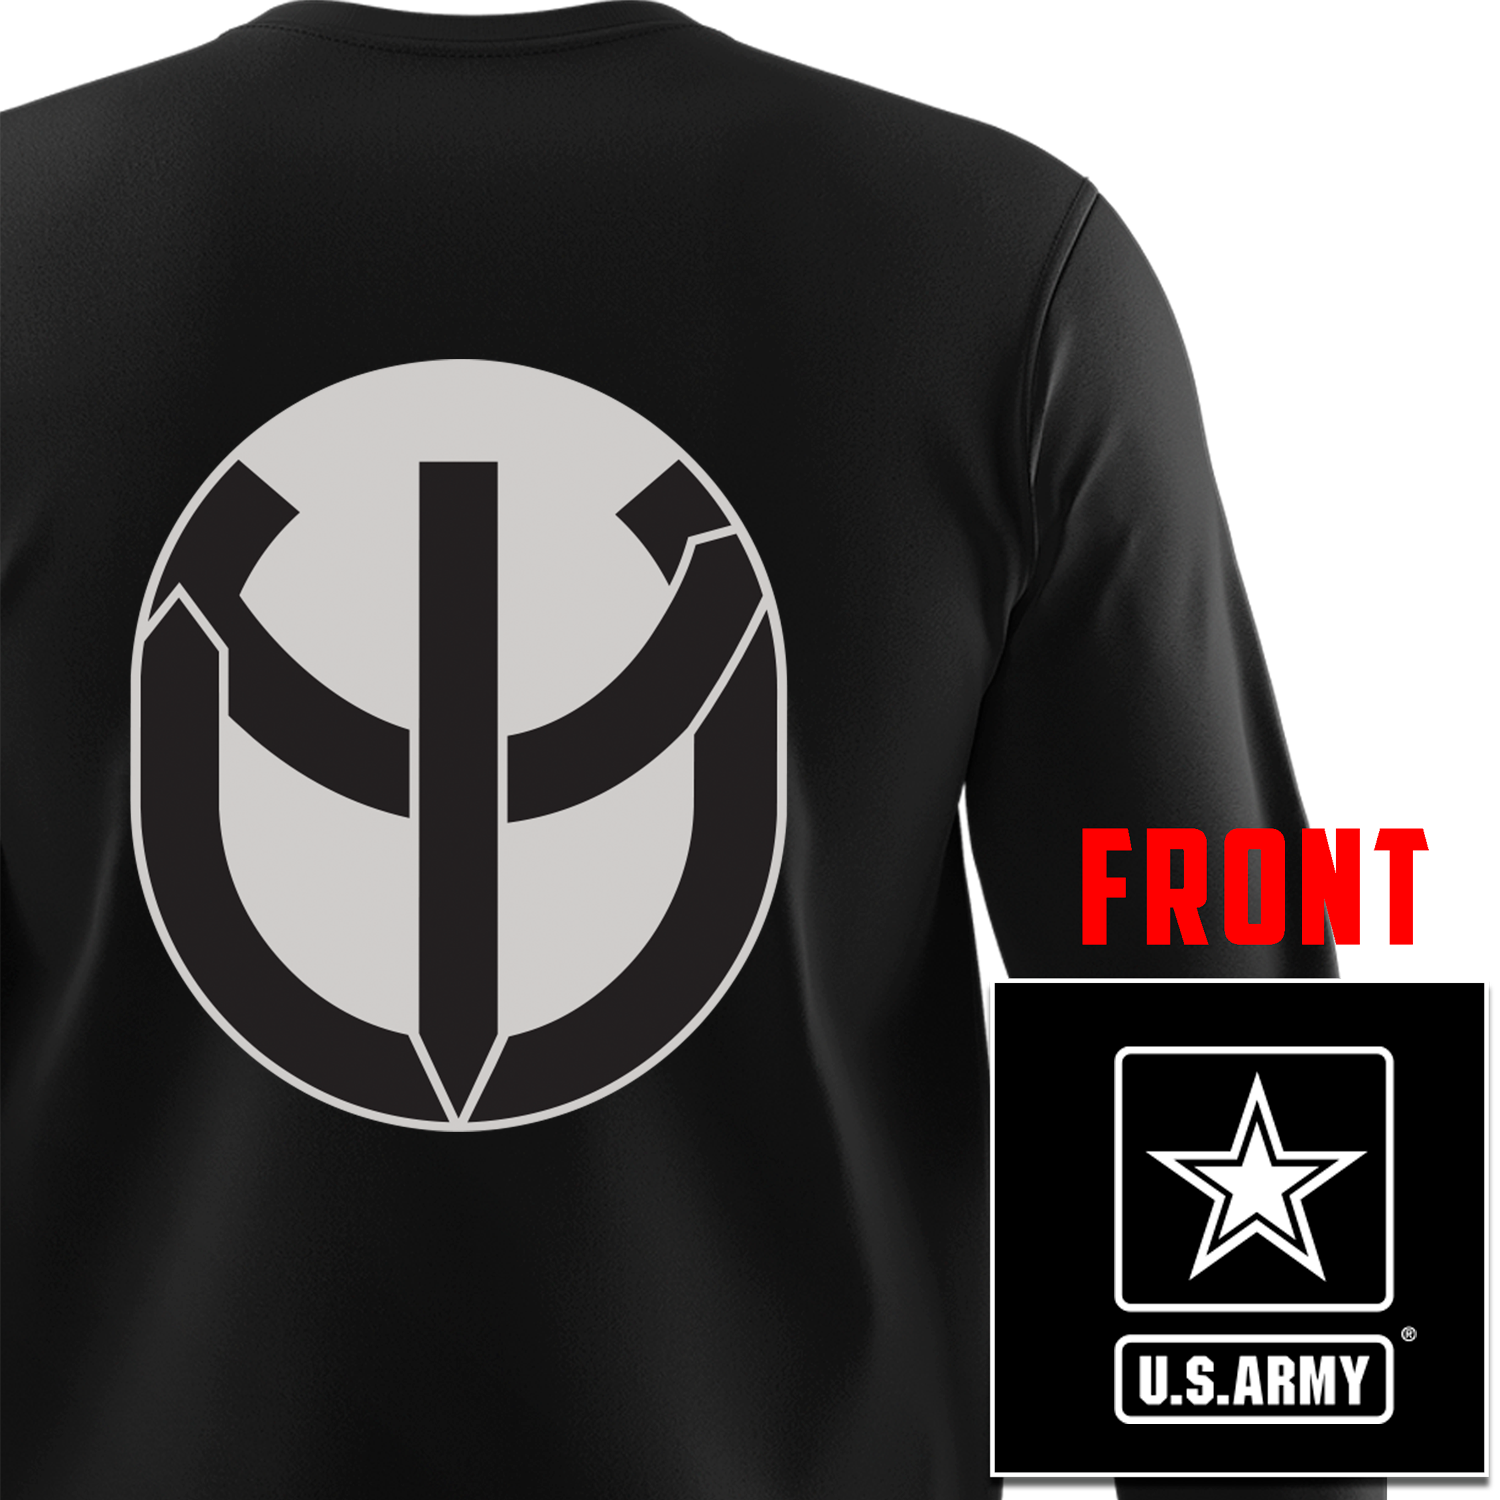 5th Psychological Operations Battalion Long Sleeve T-Shirt-MADE IN THE USA